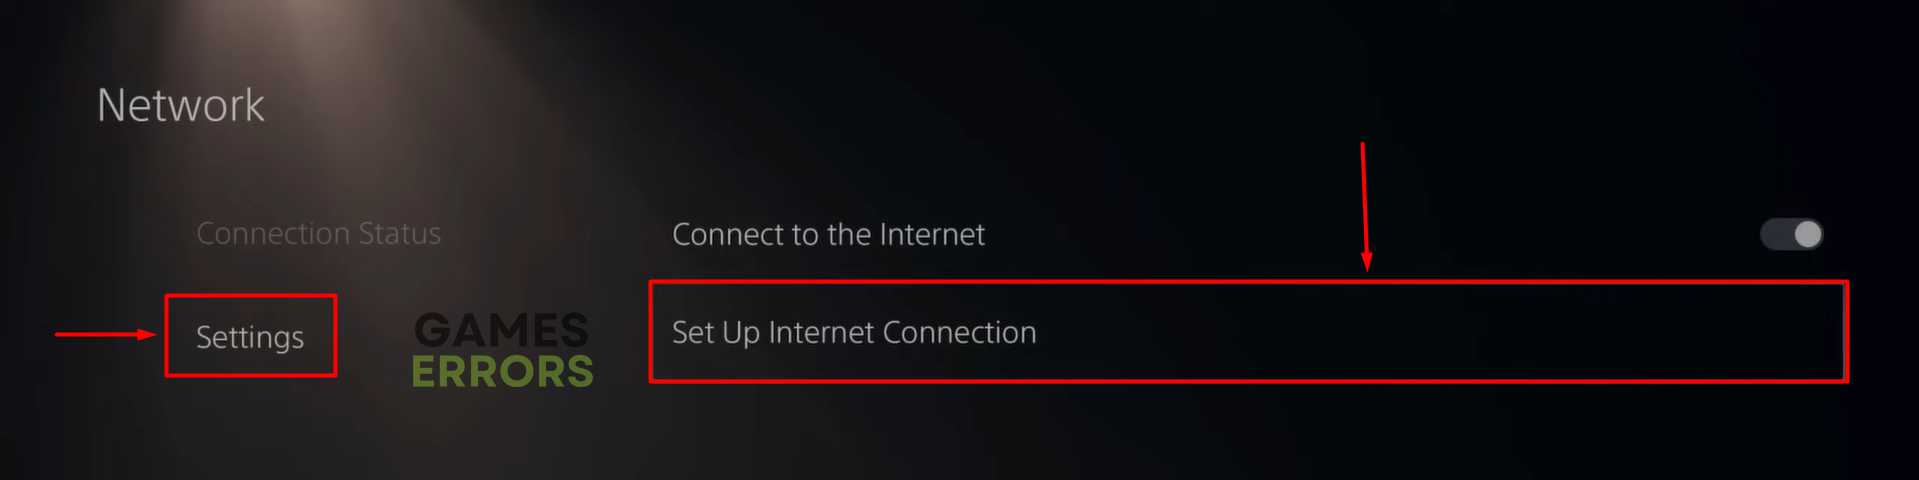 ps5 network settings set up